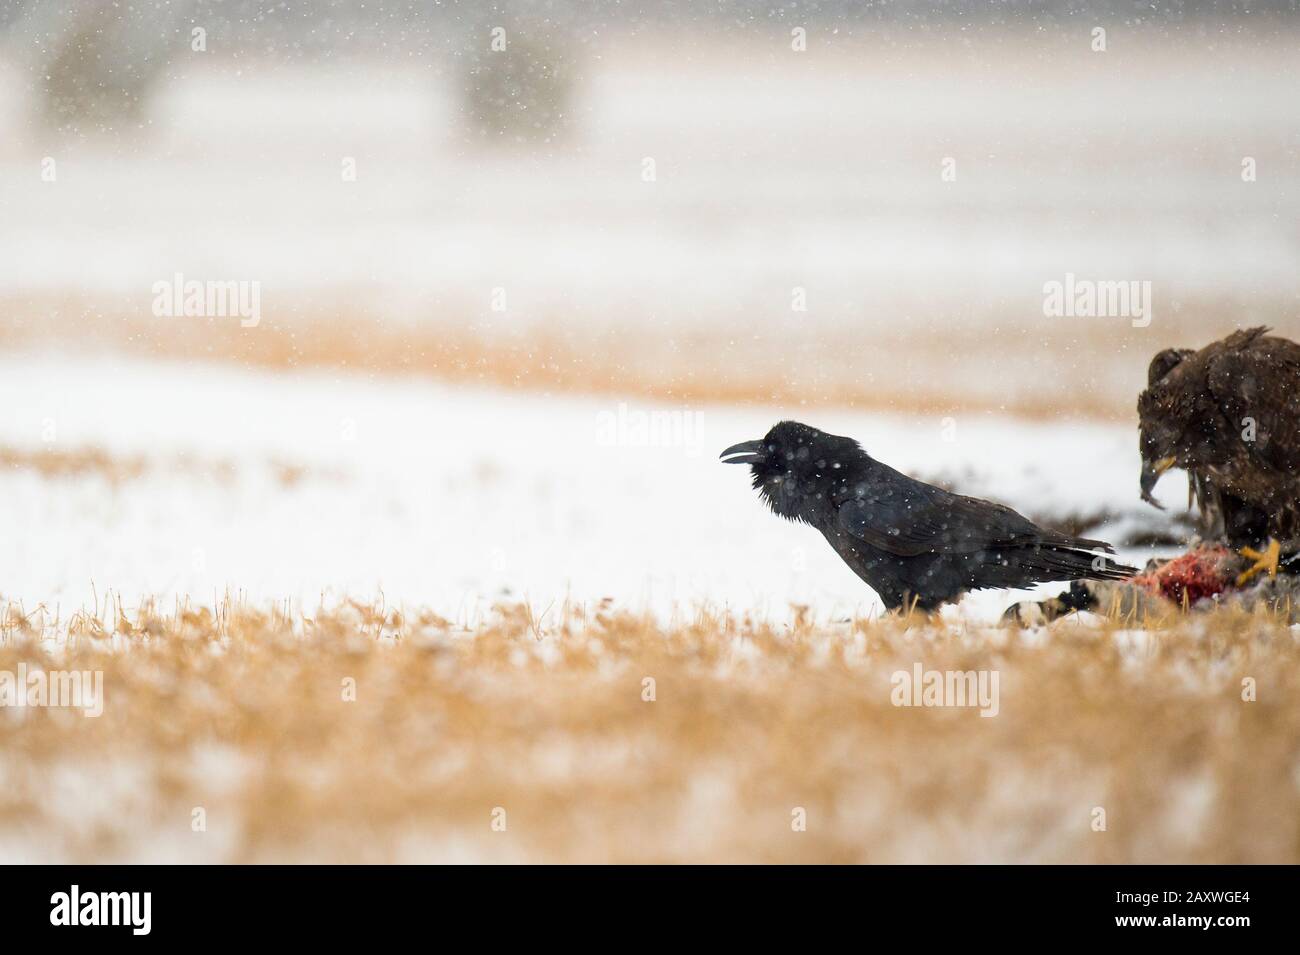 A Common Raven sitting on the ground in an open field on a cold snowy day. Stock Photo